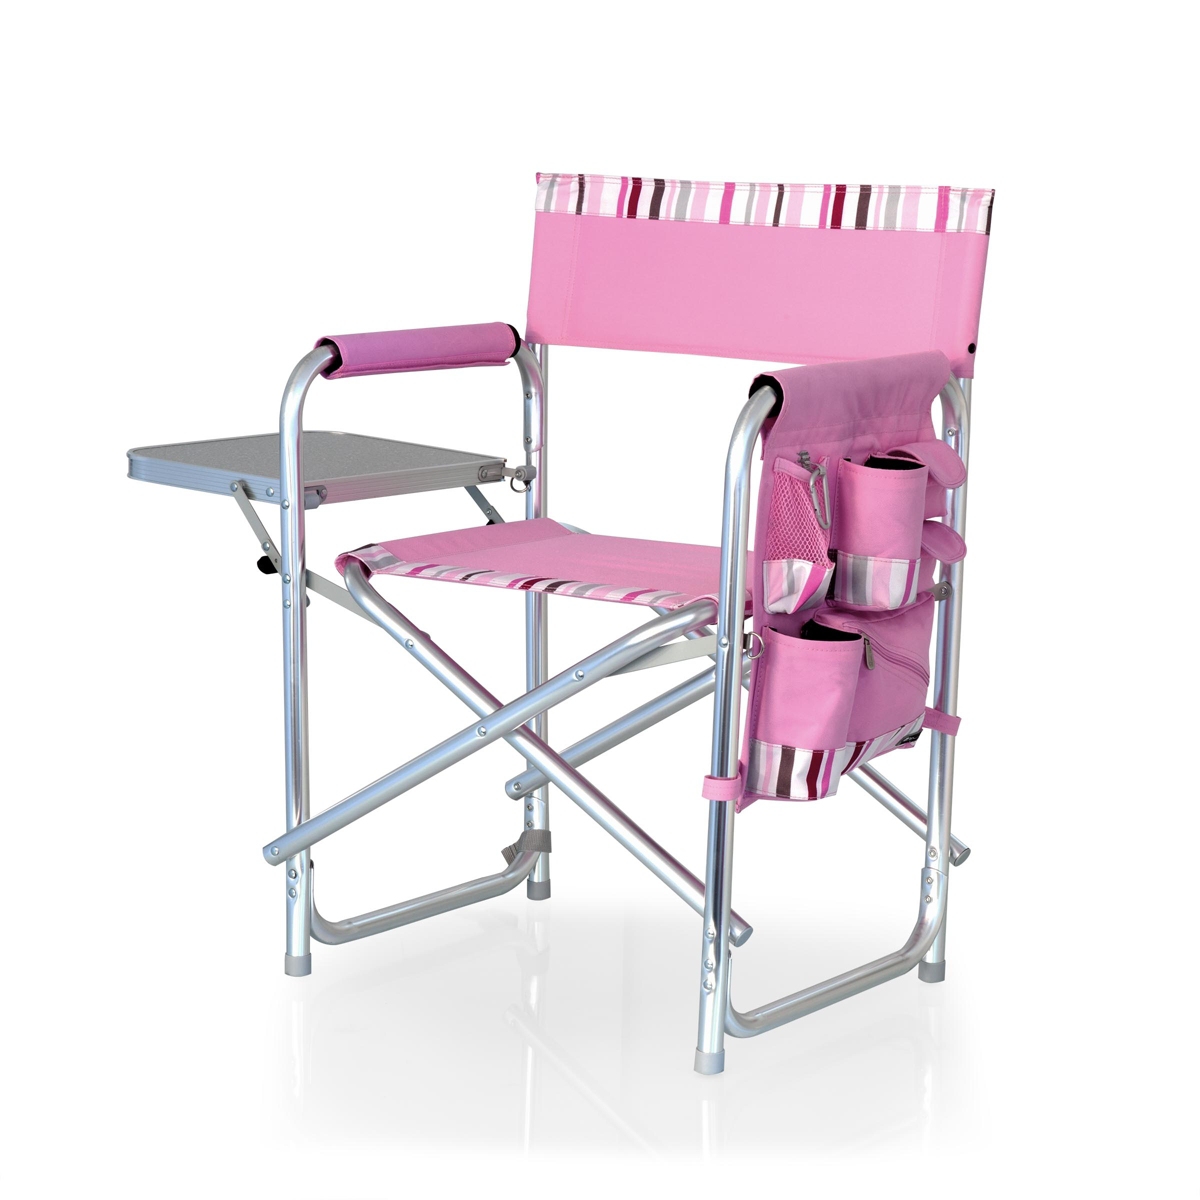 by Picnic Time Pink Portable Folding Sports Chair - Pink